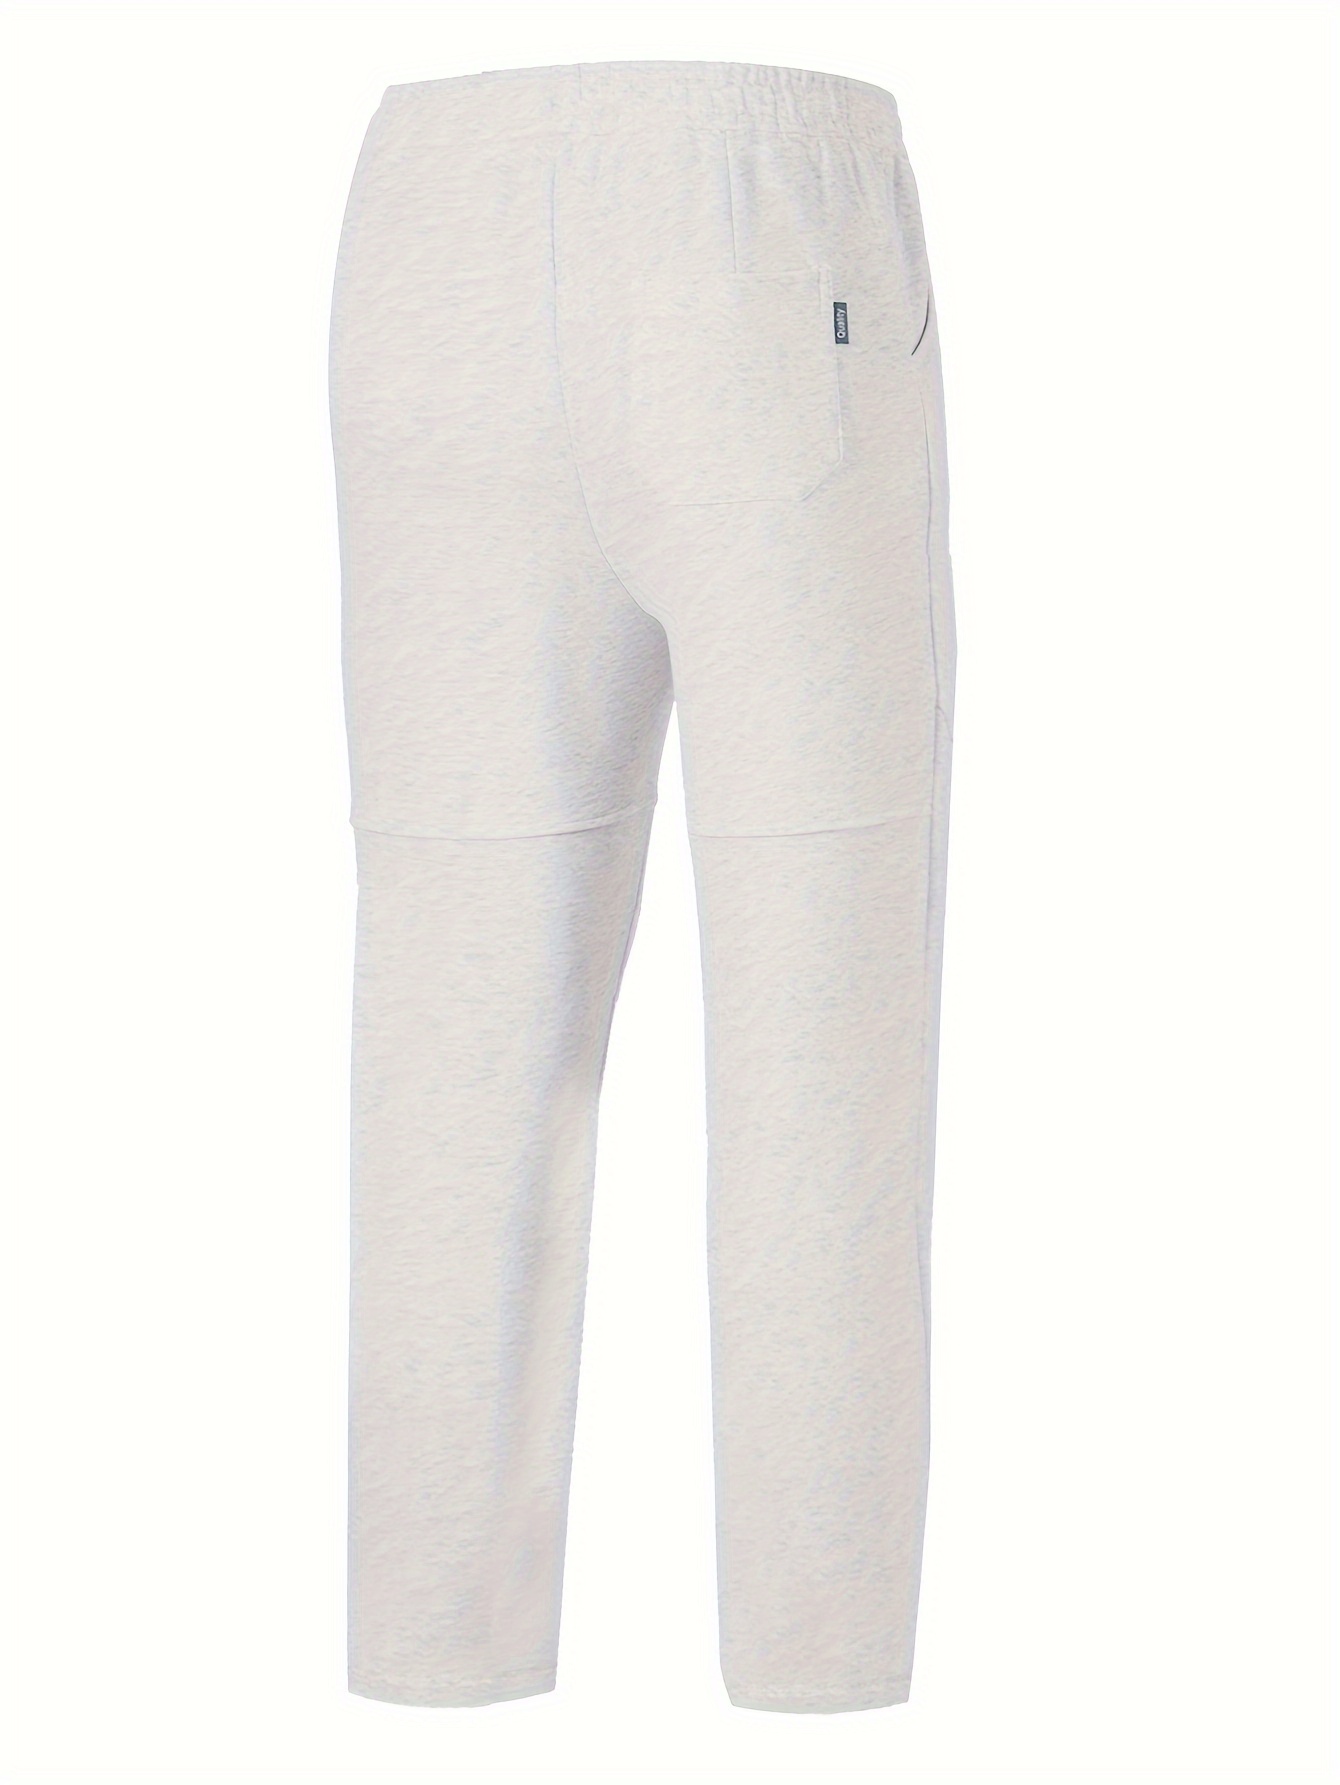 Winter Mens Double Layer Fleece Sweatpants Thick, Warm, And Casual